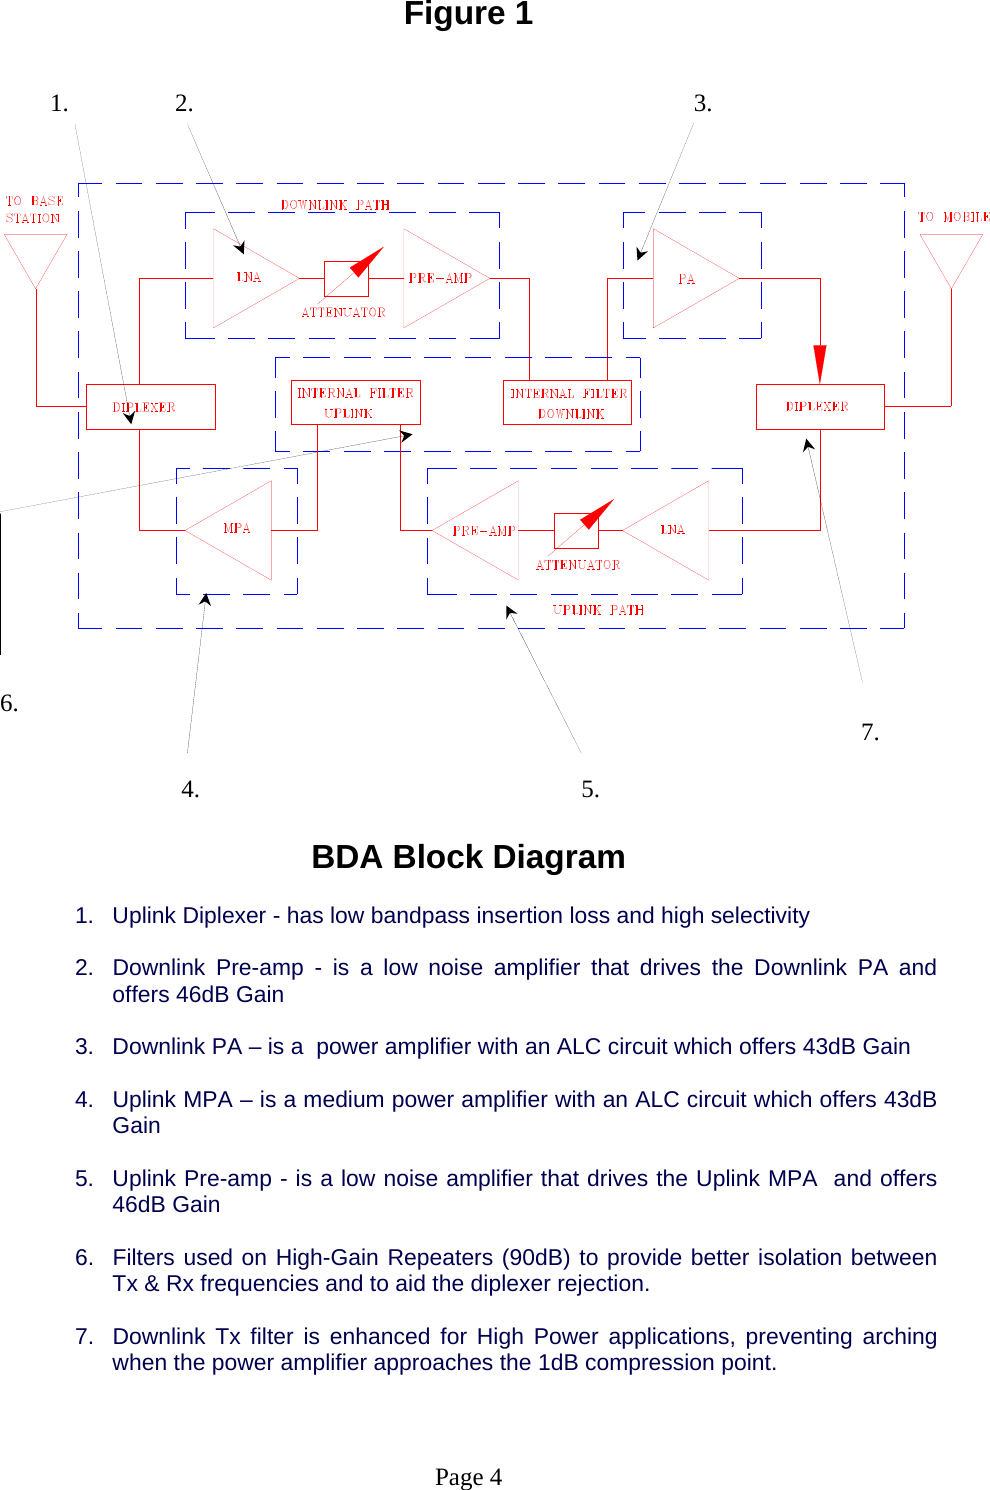 Figure 1            1.           2.                   3.             6.                                                  7.                         4.                   5.  BDA Block Diagram  1.  Uplink Diplexer - has low bandpass insertion loss and high selectivity   2.  Downlink Pre-amp - is a low noise amplifier that drives the Downlink PA and offers 46dB Gain  3.  Downlink PA – is a  power amplifier with an ALC circuit which offers 43dB Gain  4.  Uplink MPA – is a medium power amplifier with an ALC circuit which offers 43dB Gain  5.  Uplink Pre-amp - is a low noise amplifier that drives the Uplink MPA  and offers 46dB Gain  6.  Filters used on High-Gain Repeaters (90dB) to provide better isolation between Tx &amp; Rx frequencies and to aid the diplexer rejection.  7.  Downlink Tx filter is enhanced for High Power applications, preventing arching when the power amplifier approaches the 1dB compression point.    Page 4 